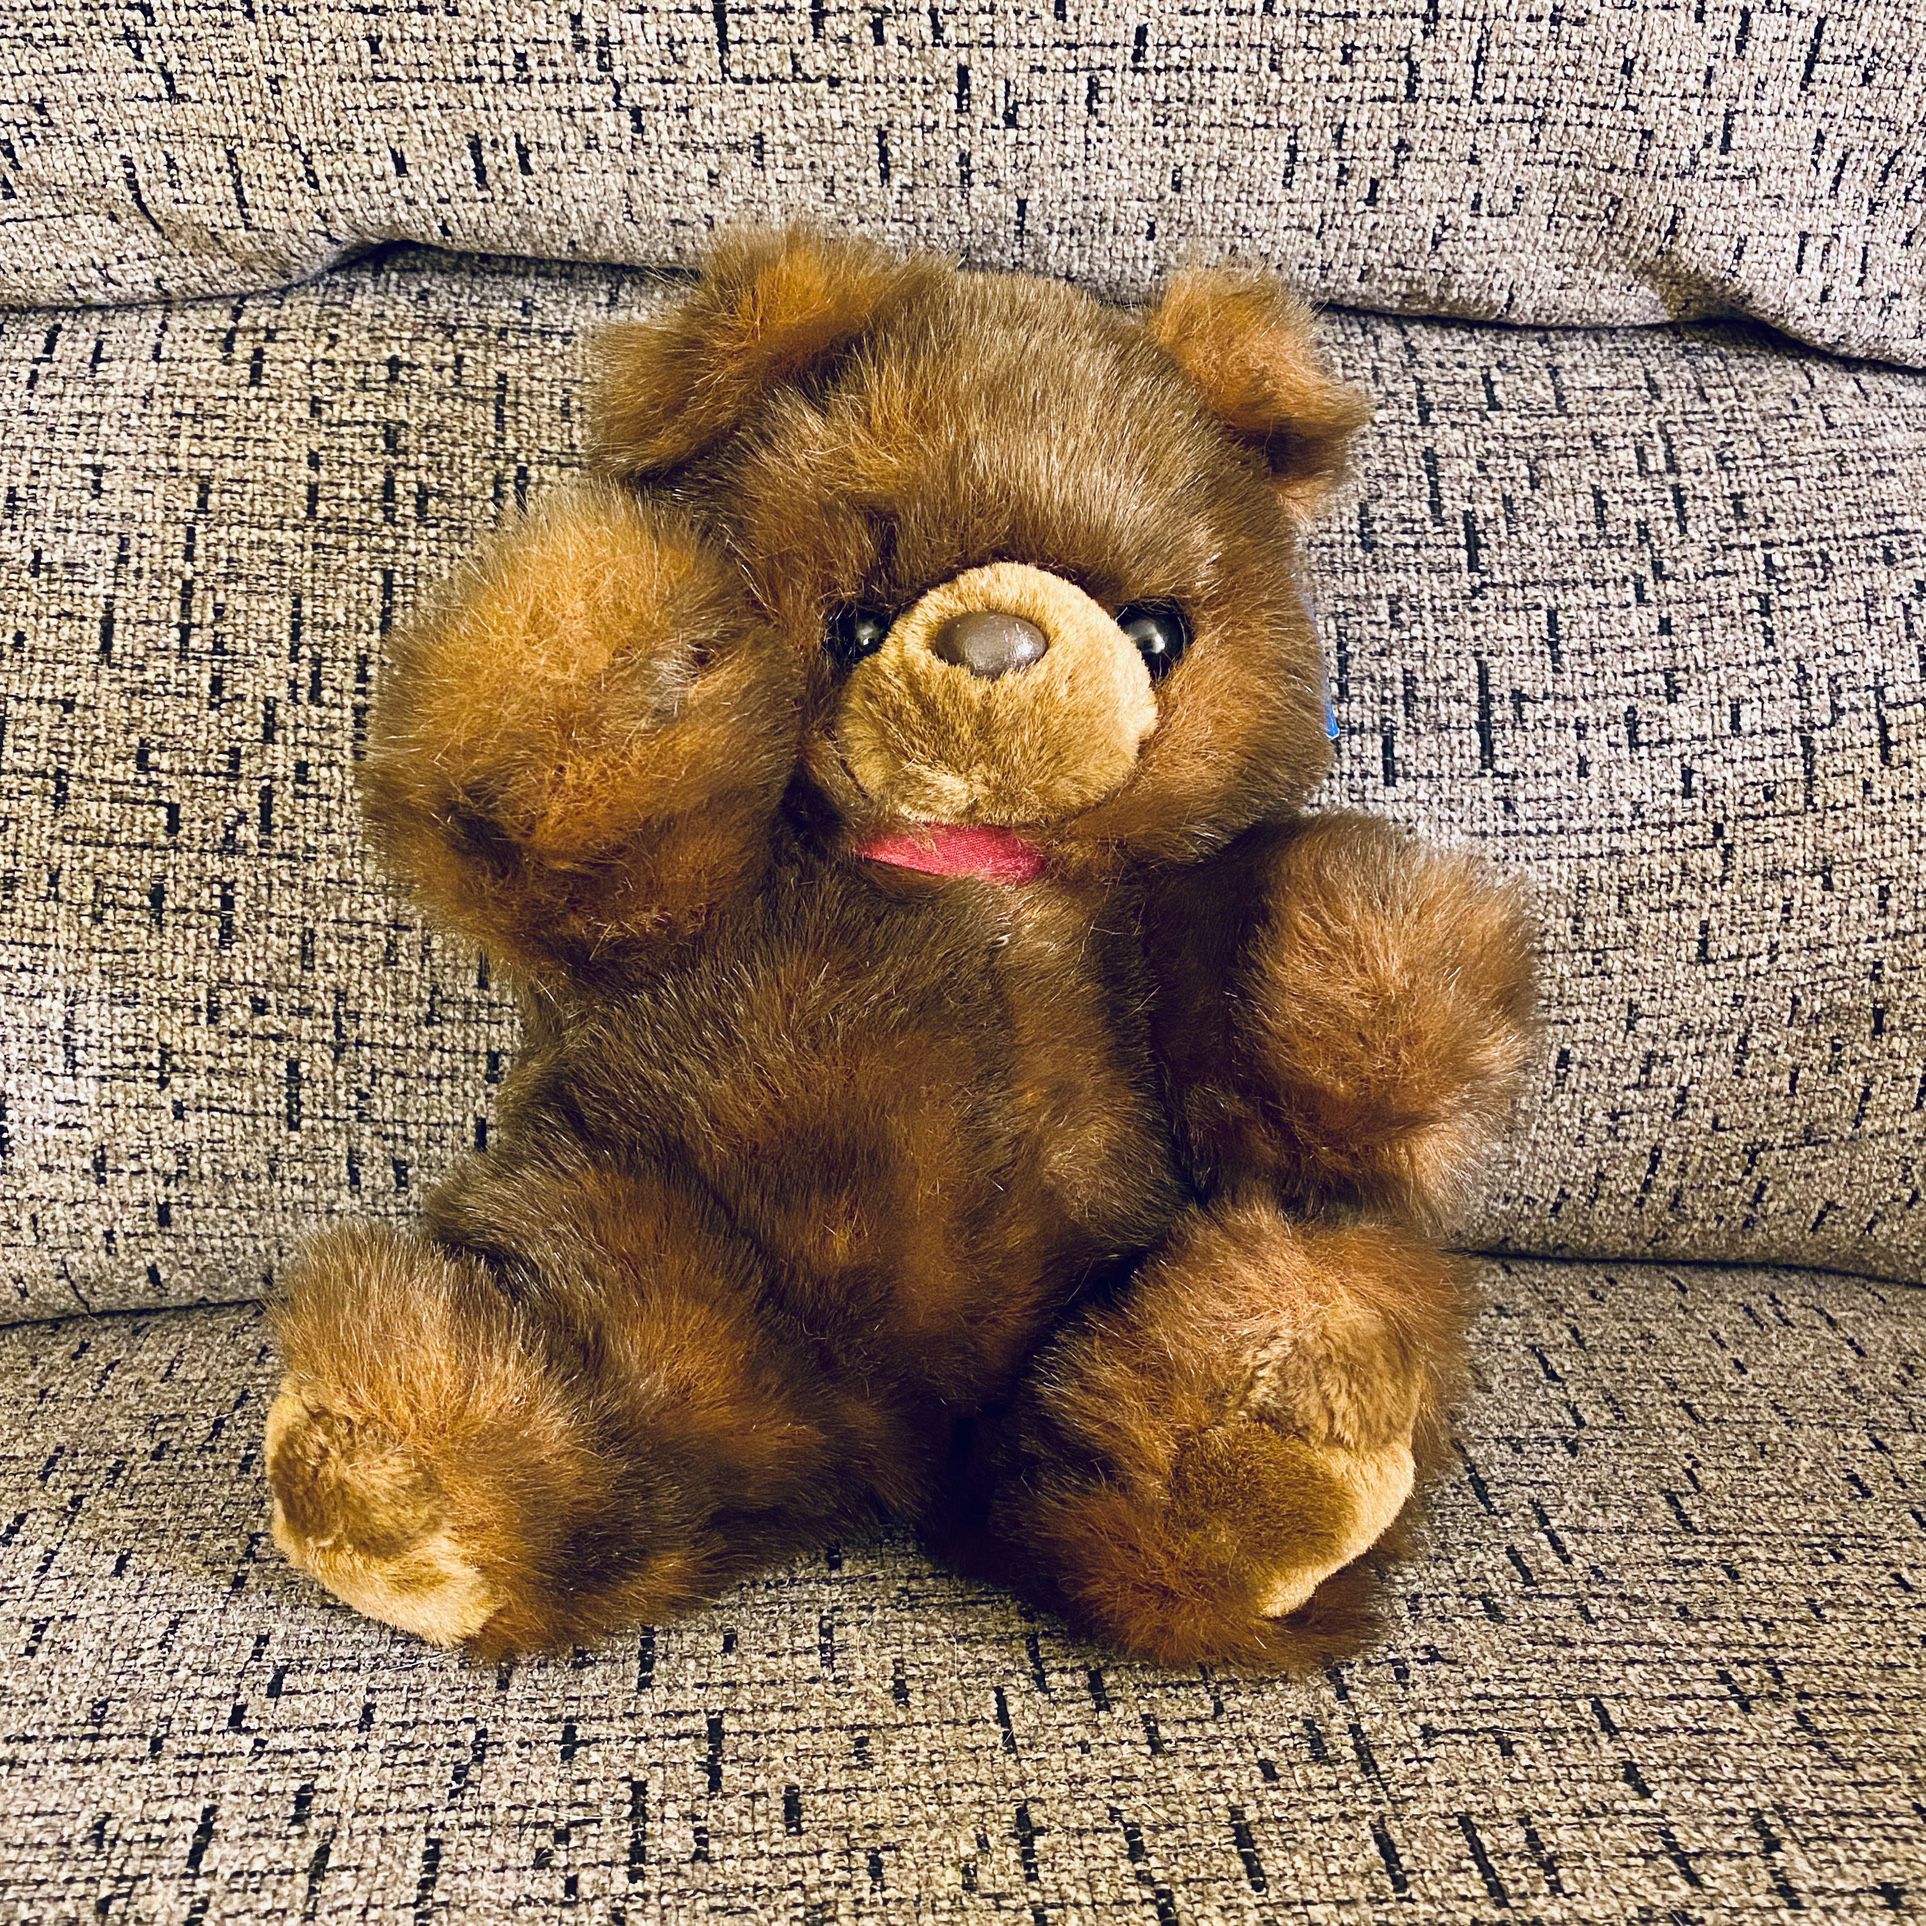 Vintage 1992 Purr-Fection Brown Teddy Bear by MJC With Tag